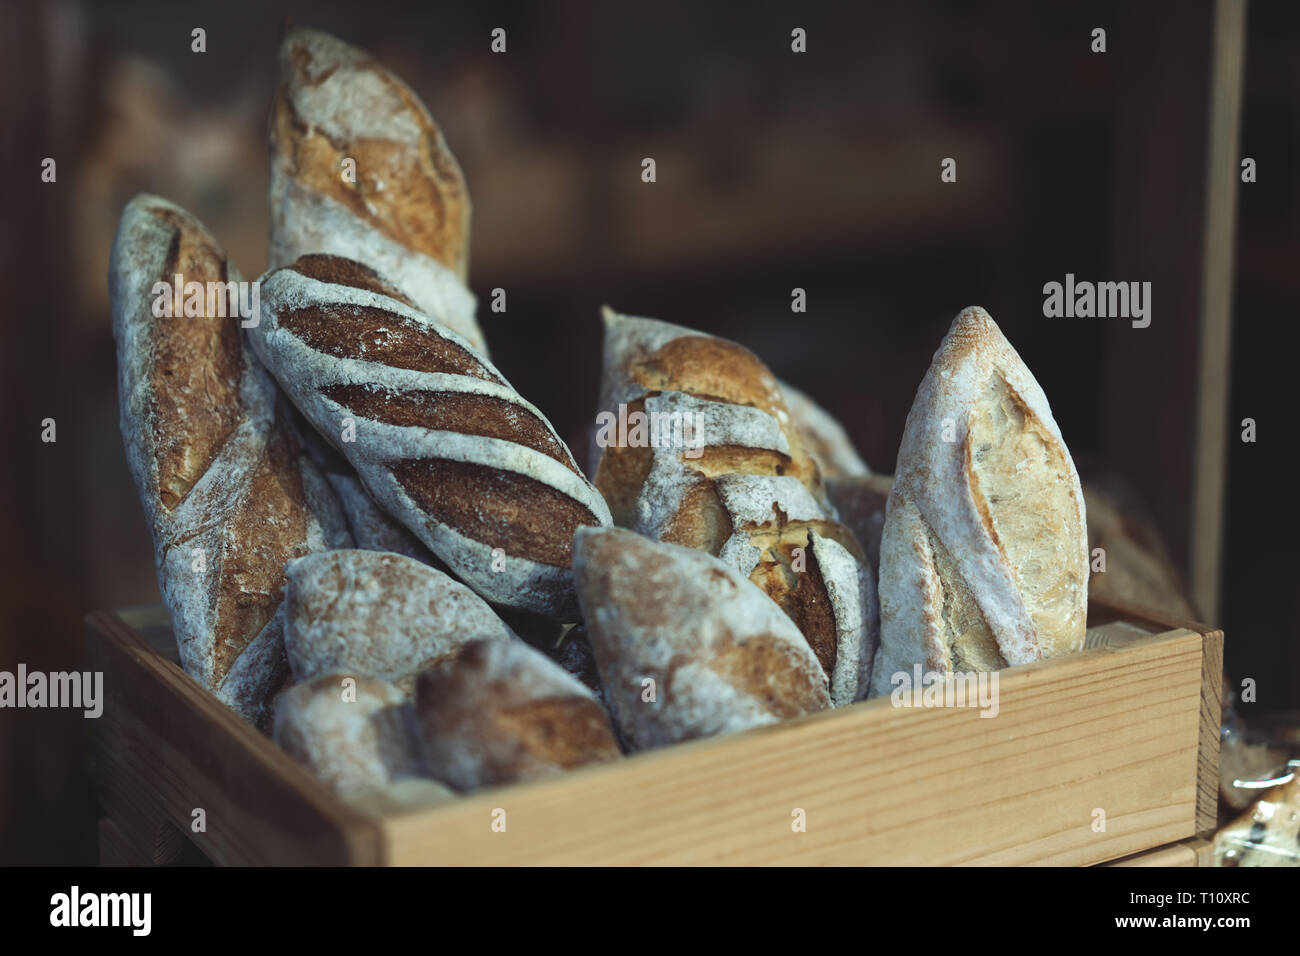 https://c8.alamy.com/comp/T10XRC/bread-loaves-large-and-small-in-a-wooden-box-on-the-counter-in-a-bakery-shop-fresh-pastries-and-flour-products-T10XRC.jpg